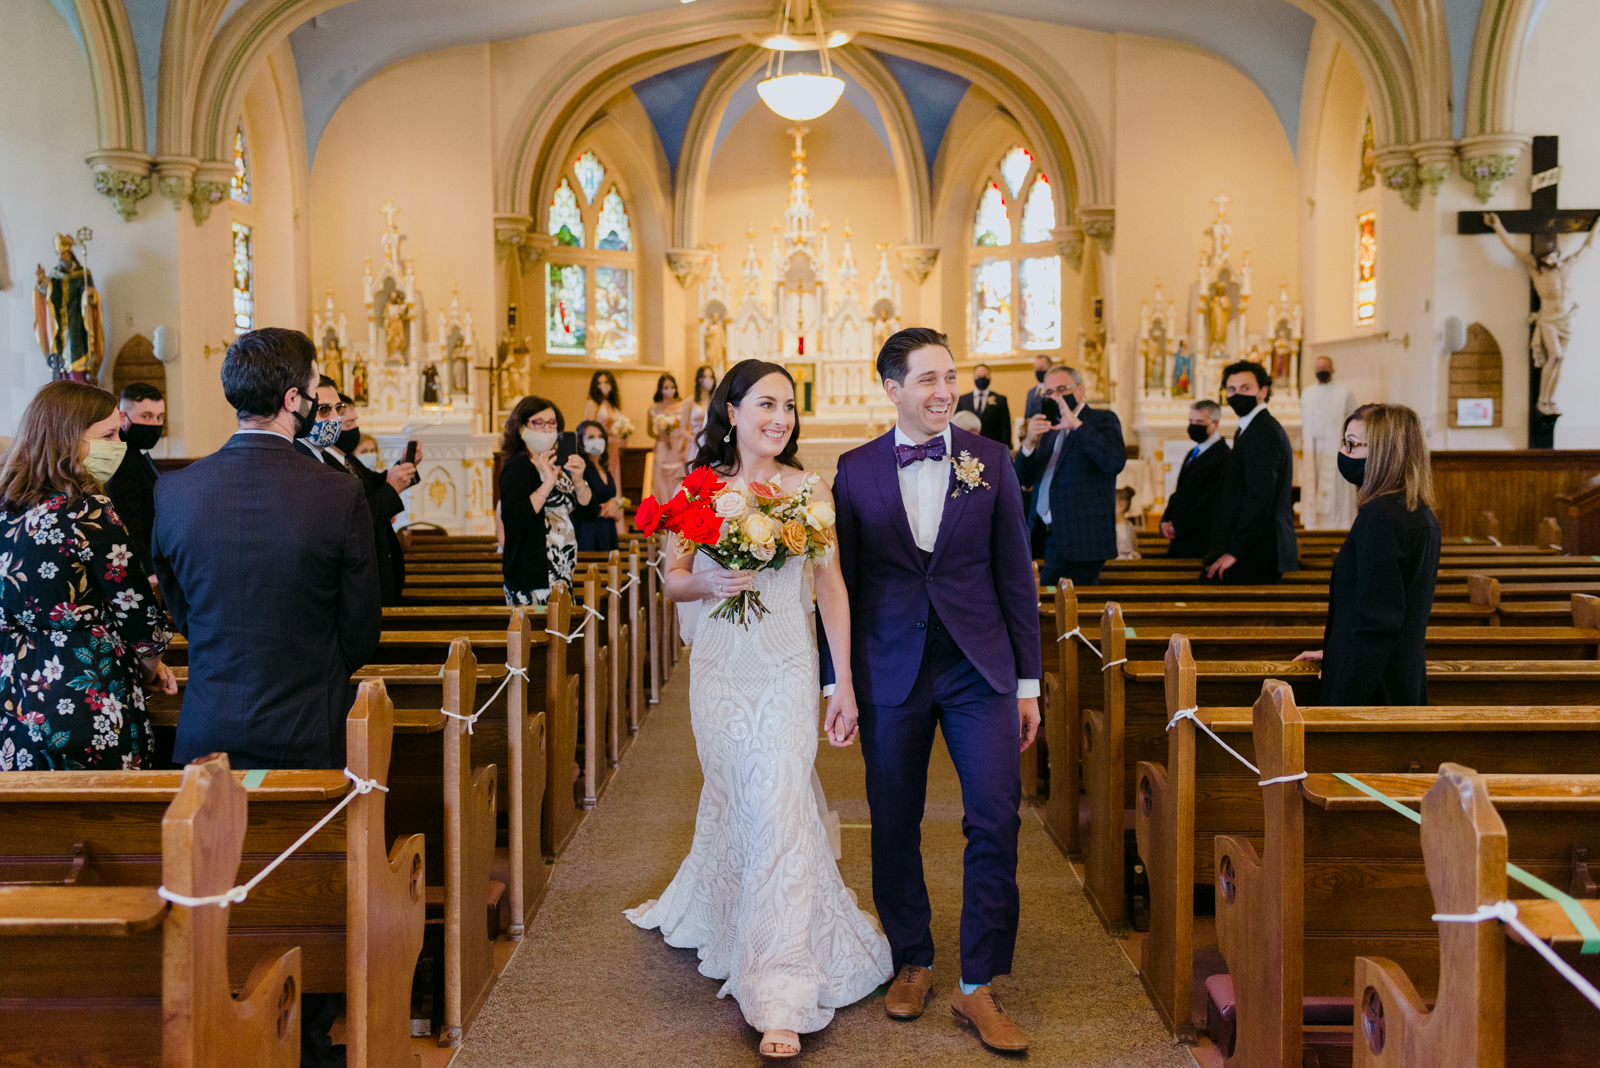 bride and groom recessional during church wedding ceremony